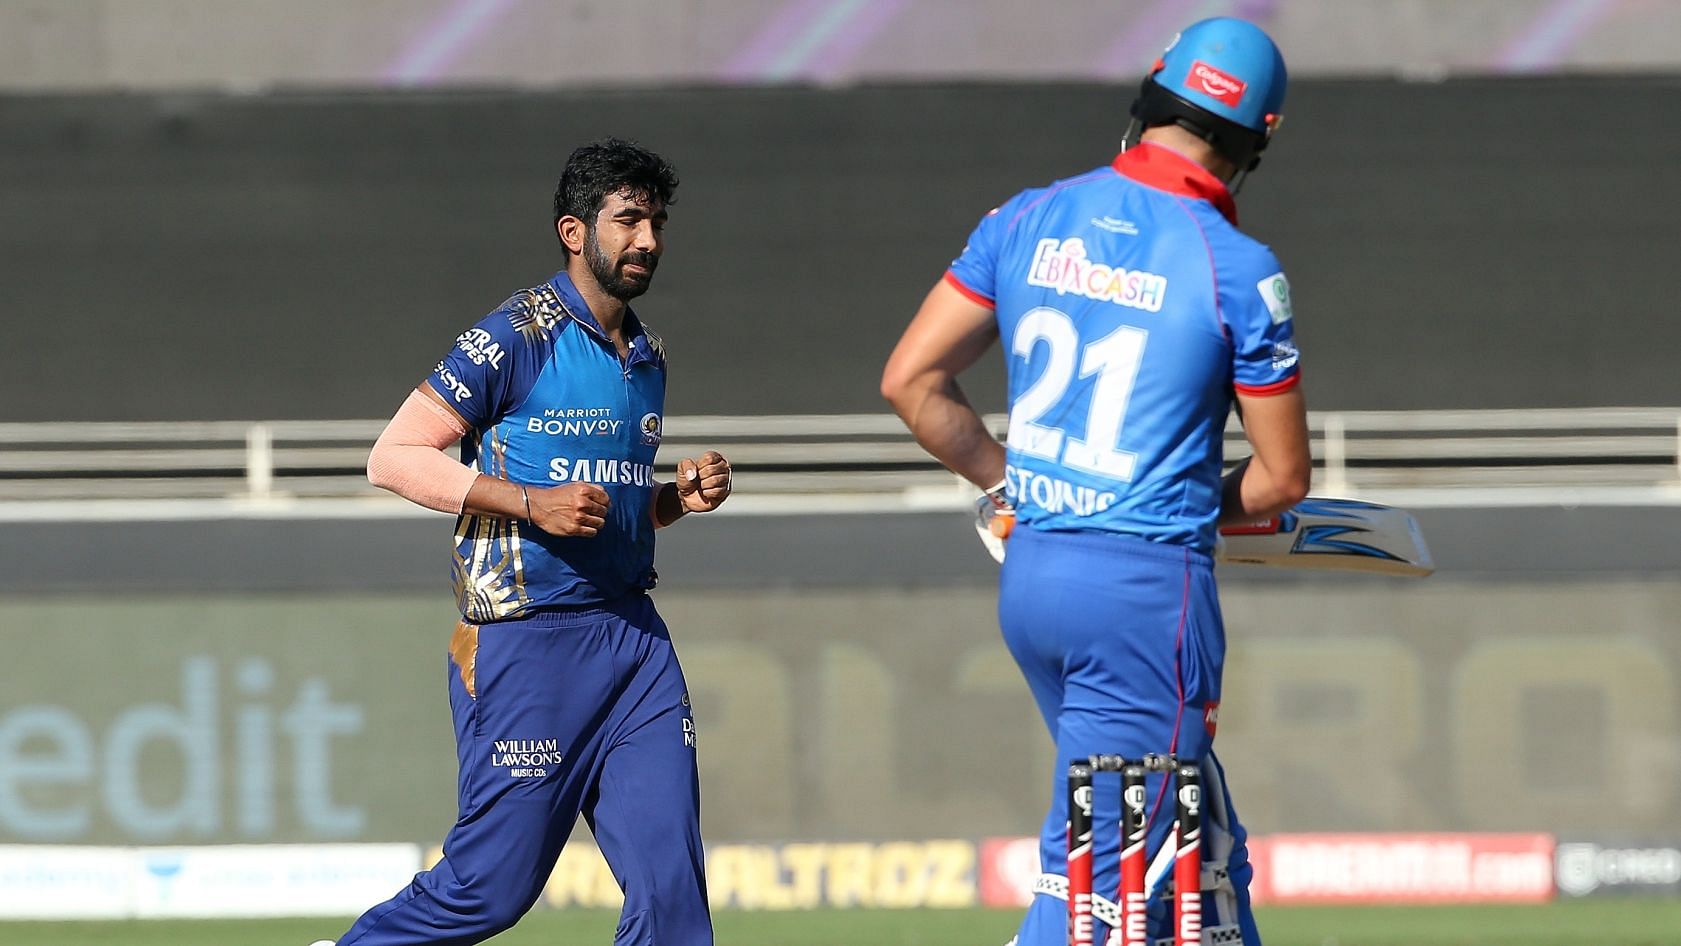 Jasprit Bumrah after dismissing Marcus Stoinis at the start of a dream over in Dubai.&nbsp;